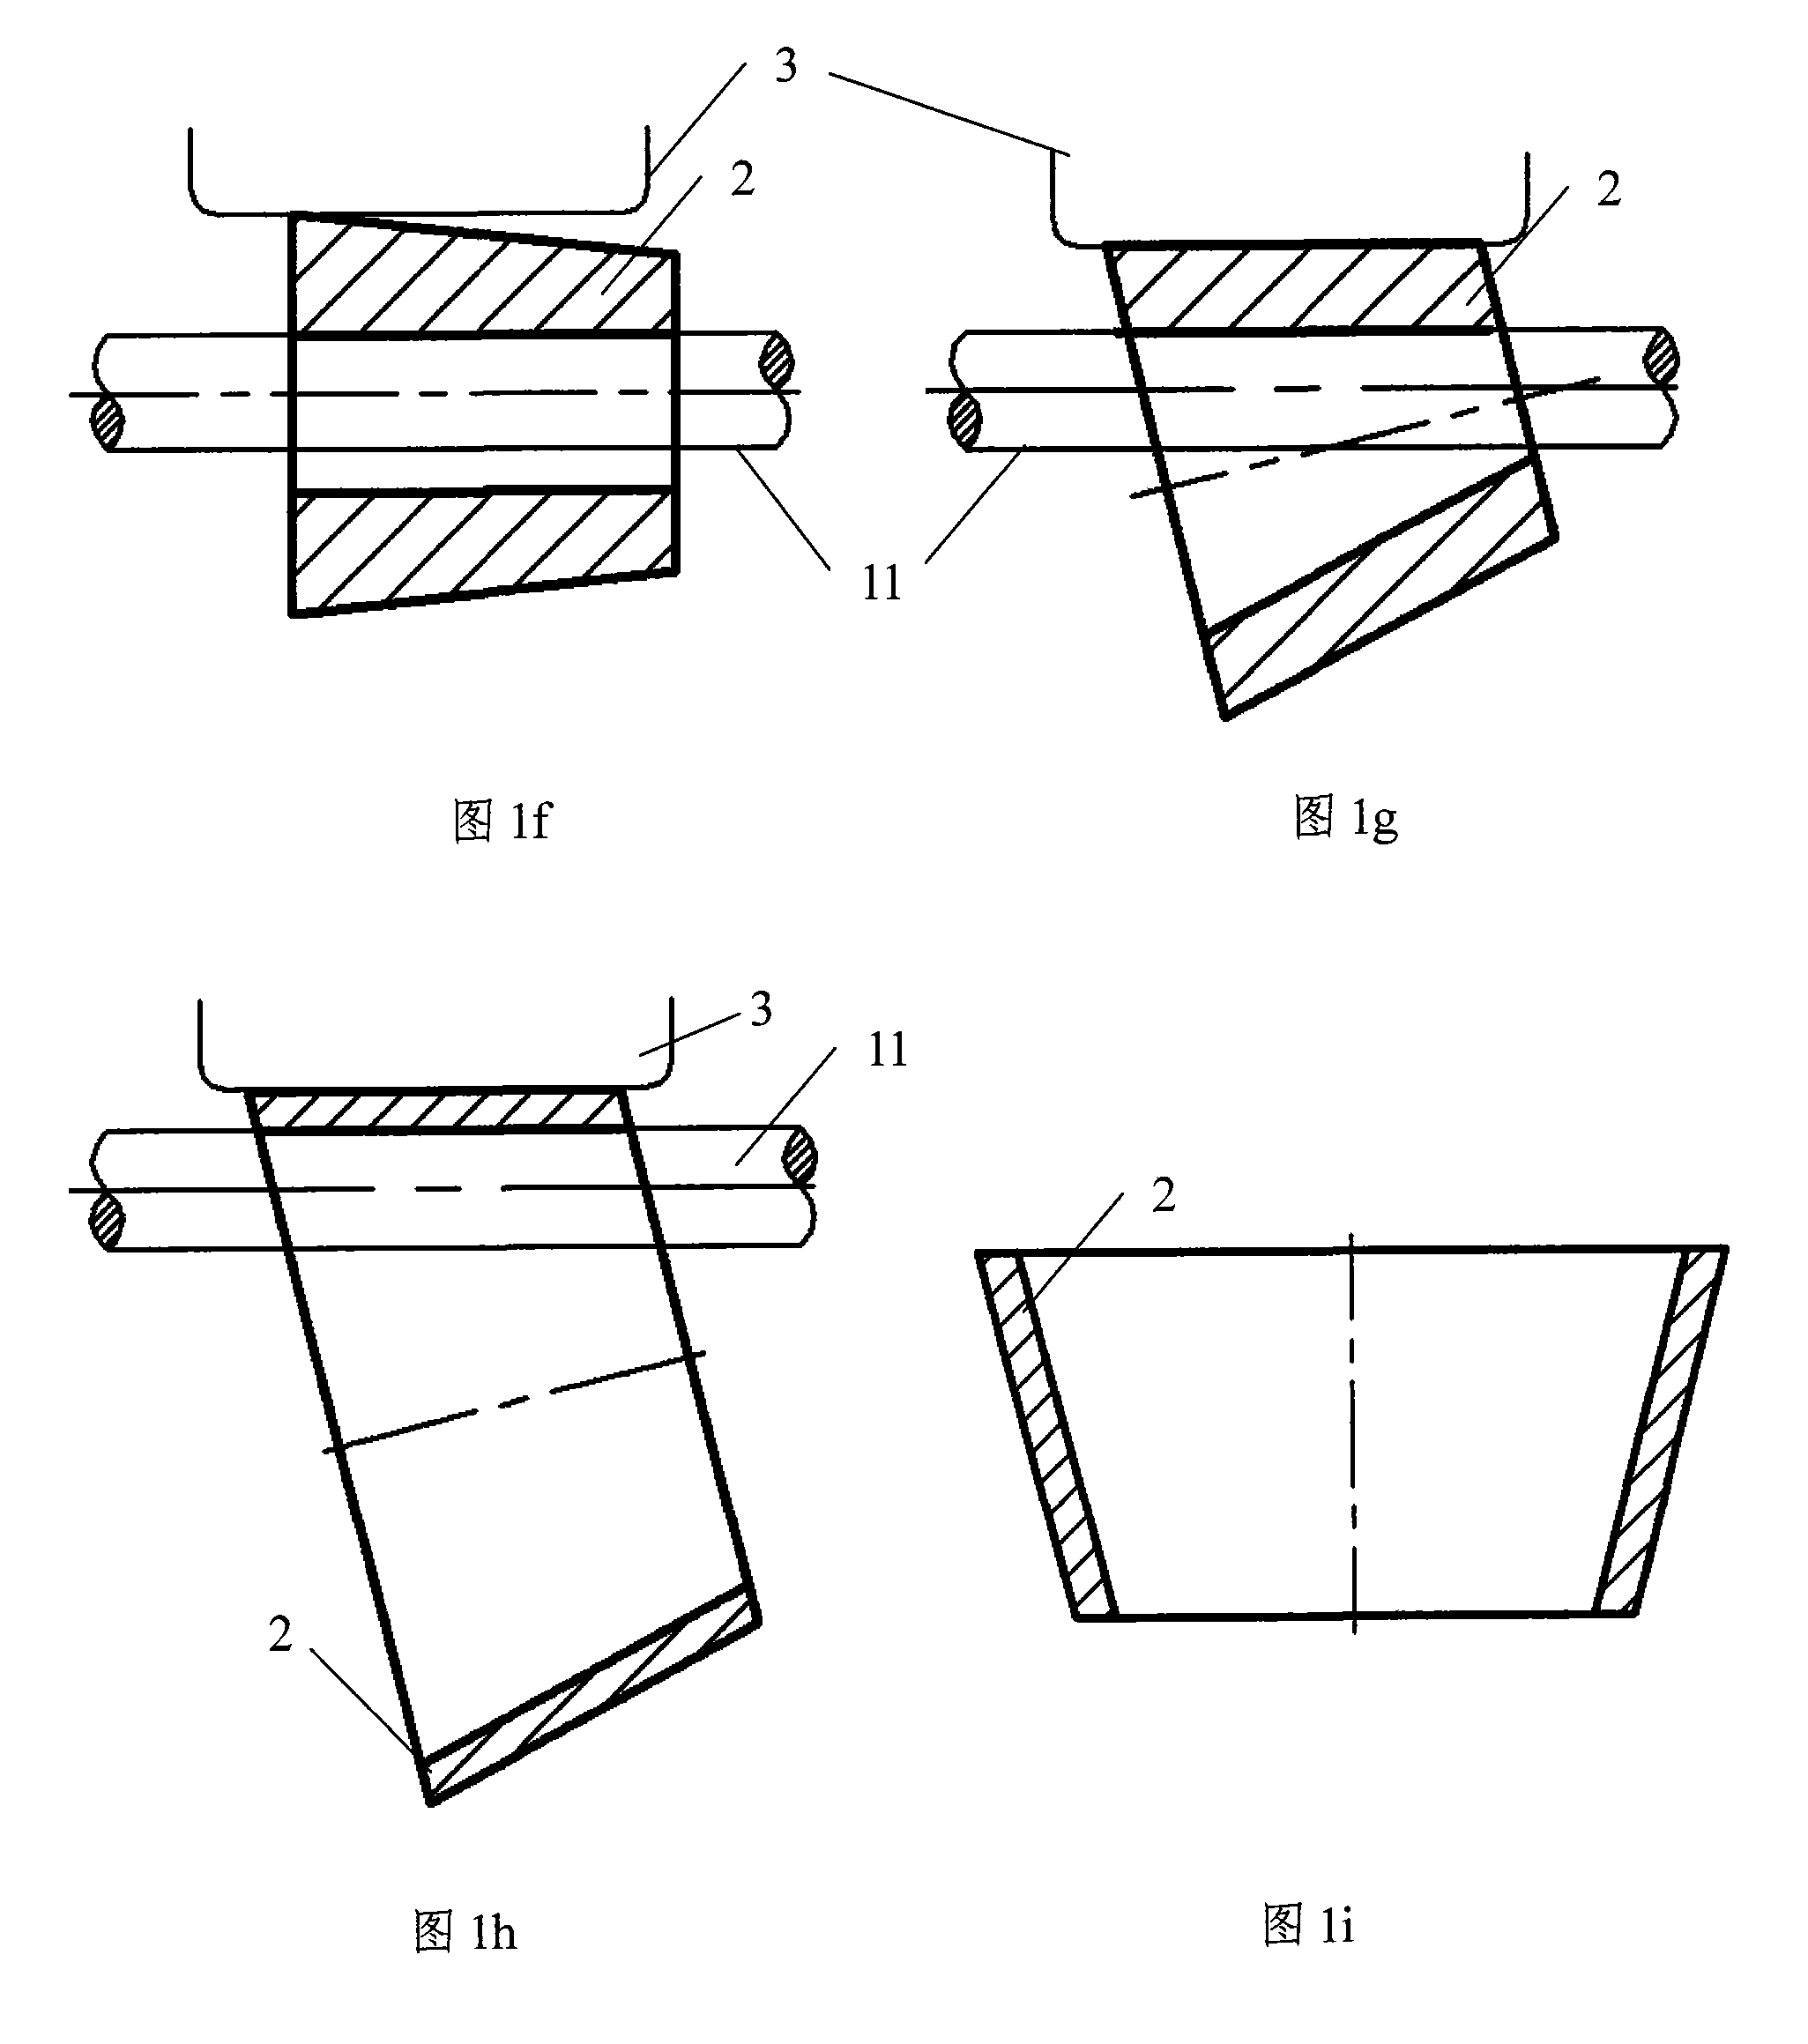 Design method of middle blank and prefabricating blank during conical shell forgeable piece forming process